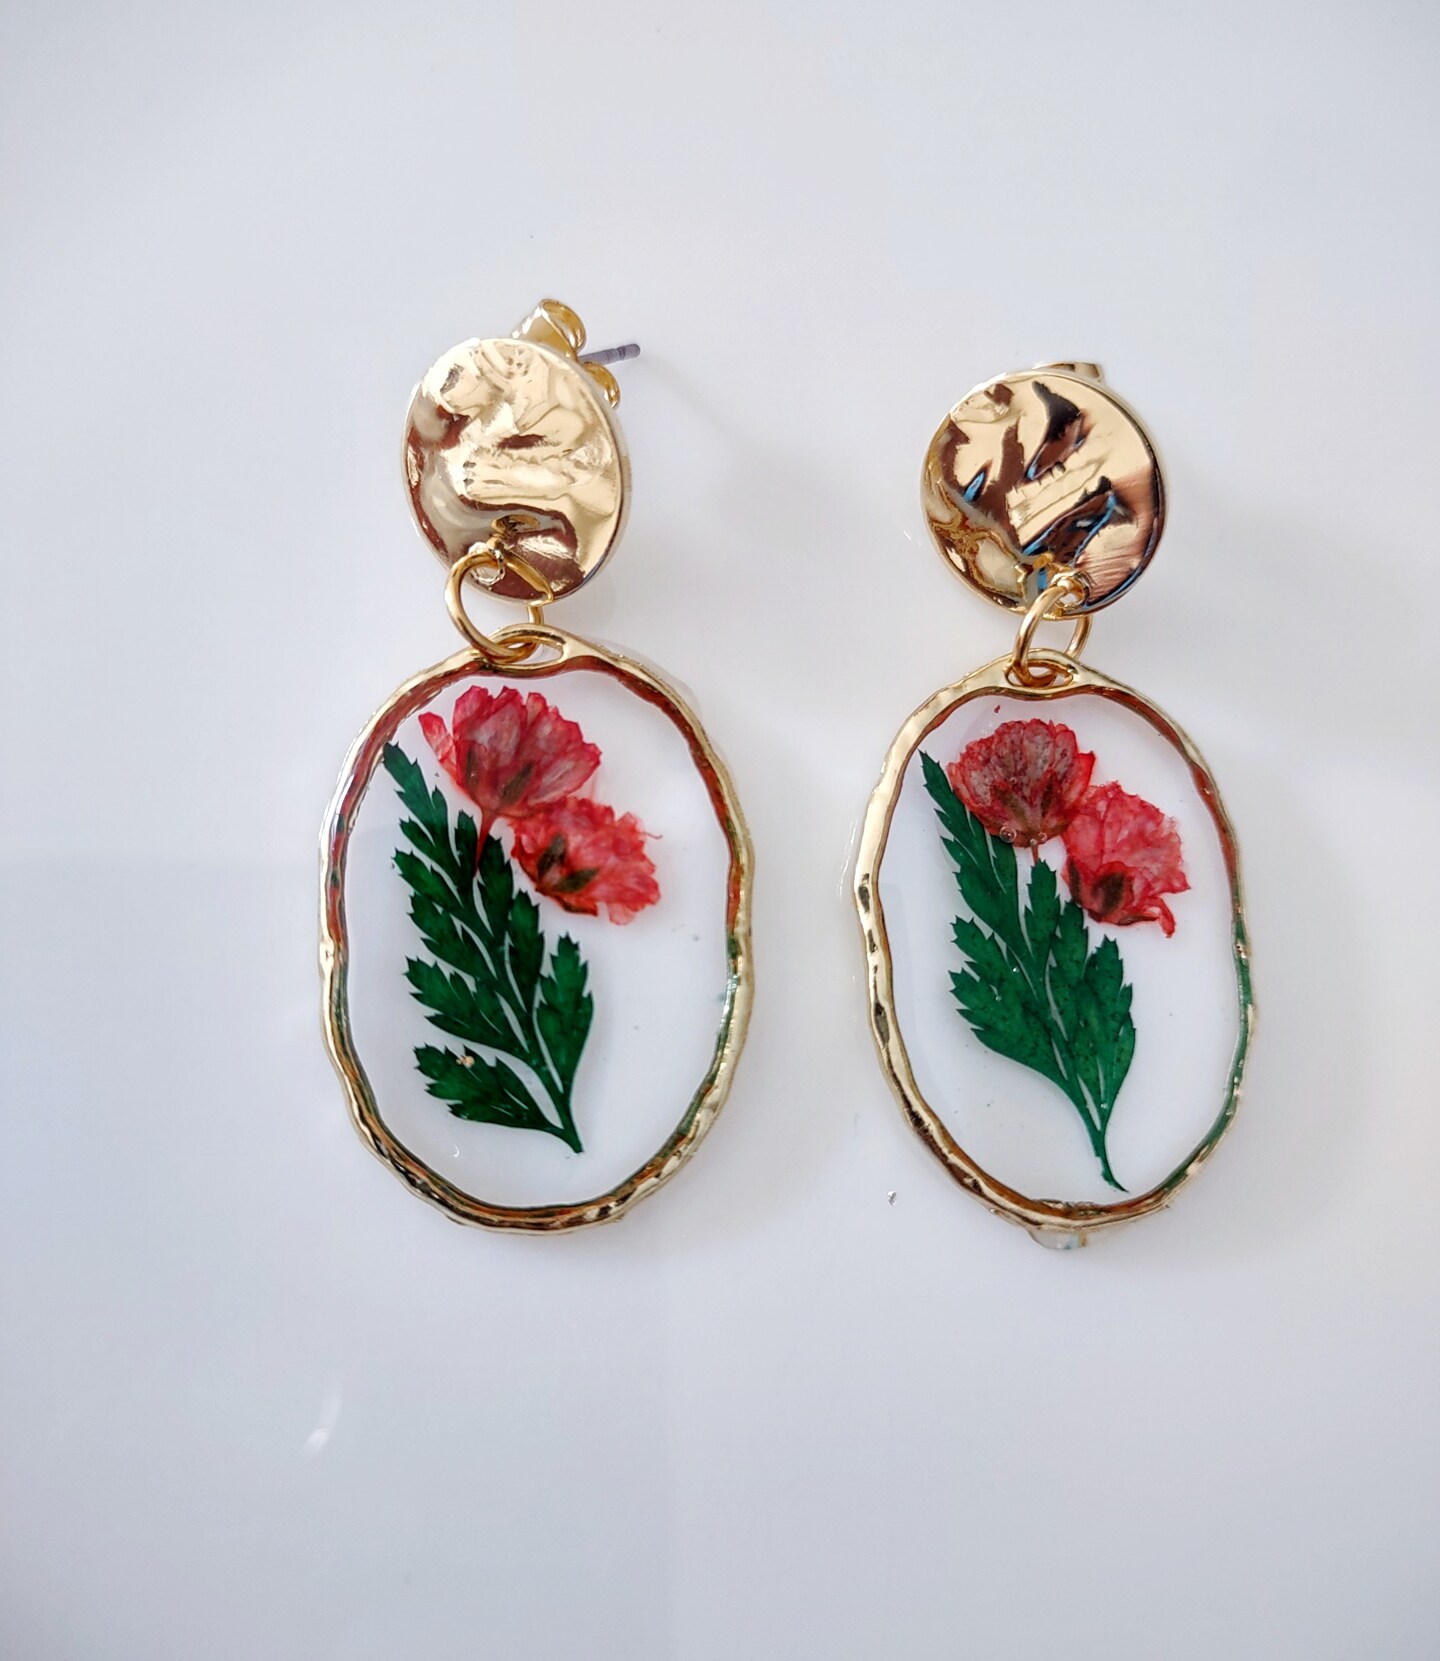 Amazon.com: Pressed Flower Earrings,Handmade Floral Earrings for  Women,Unique Pressed Lobelia Erinus Flower Earrings,Resin Drop Dangle Plant  Earrings, perfect for your birthday party, Christmas, gift giving. :  Handmade Products